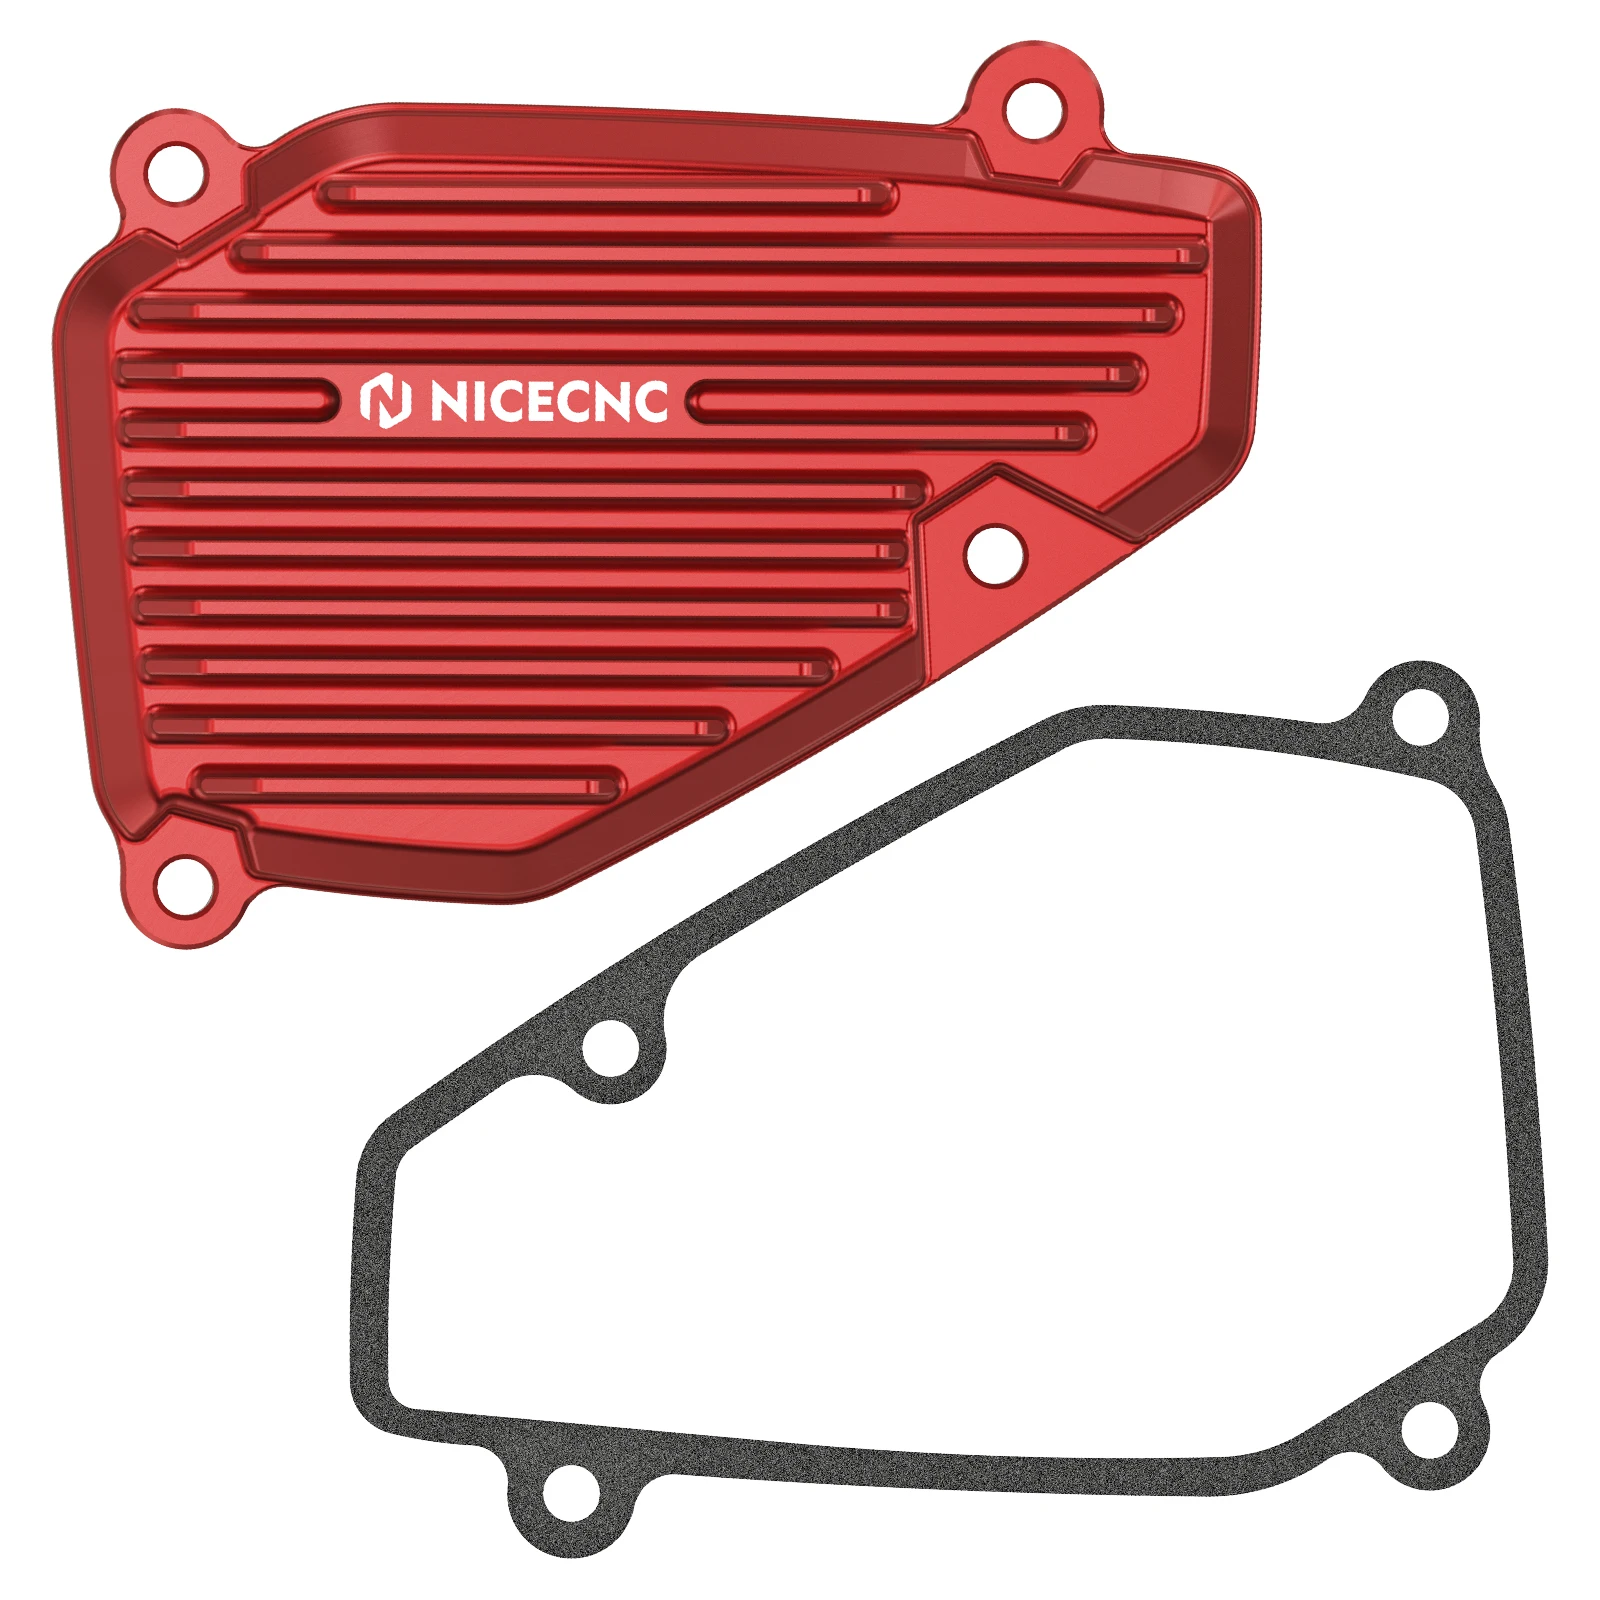 

For BETA 250 300 RR XTRAINER RR250 RR300 XTRAINER250 XTRAINER300 2013-2022 2021 Motocross Power Valve Cover Guard Protector Red